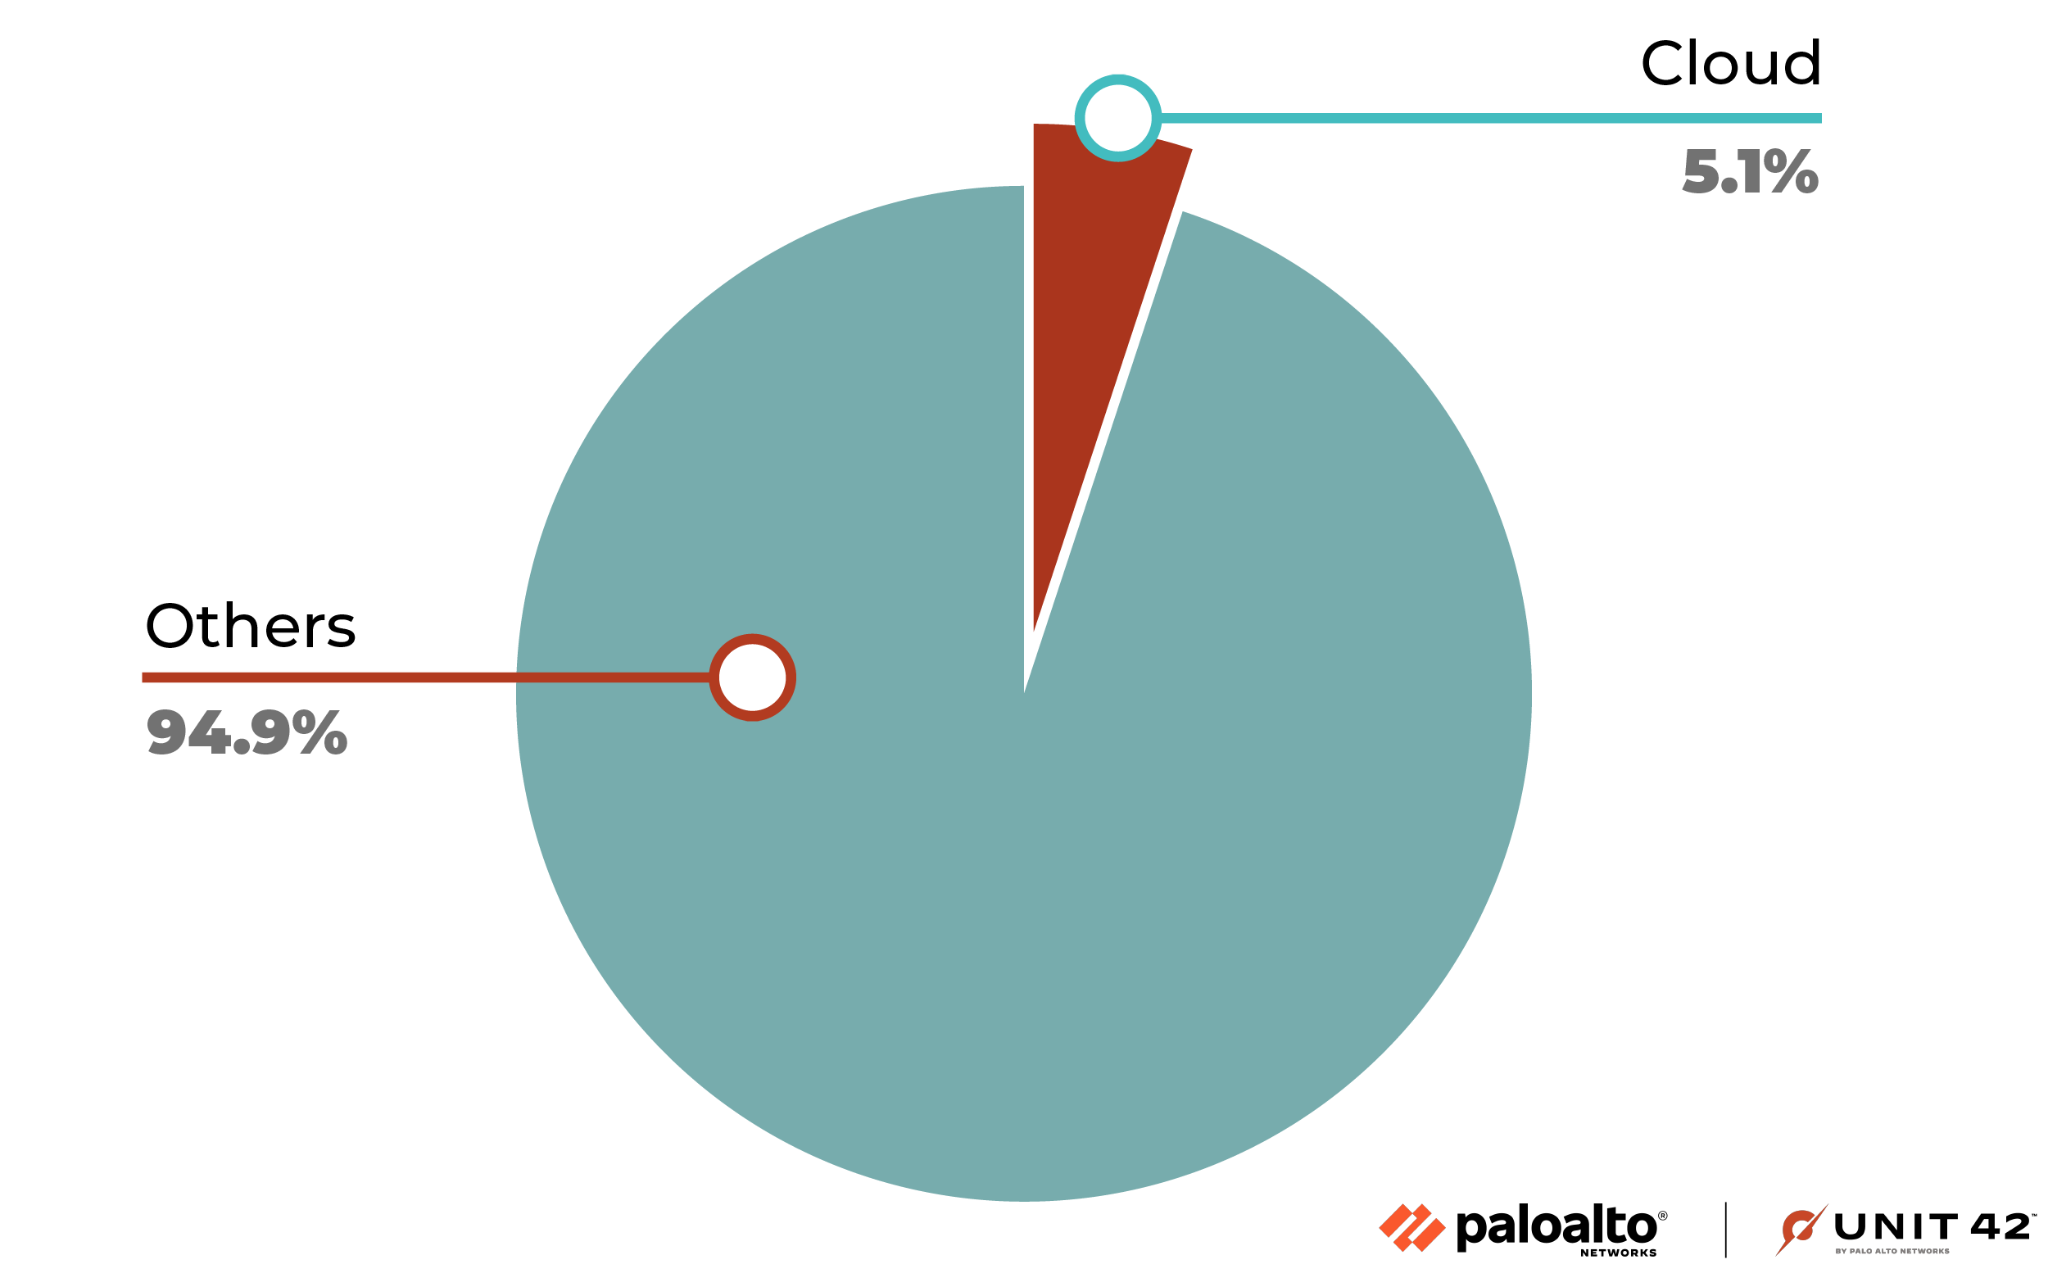 Image 4 is a pie chart showing the origin of the attacks. 94.9% are others, and 5.1% are from the cloud.